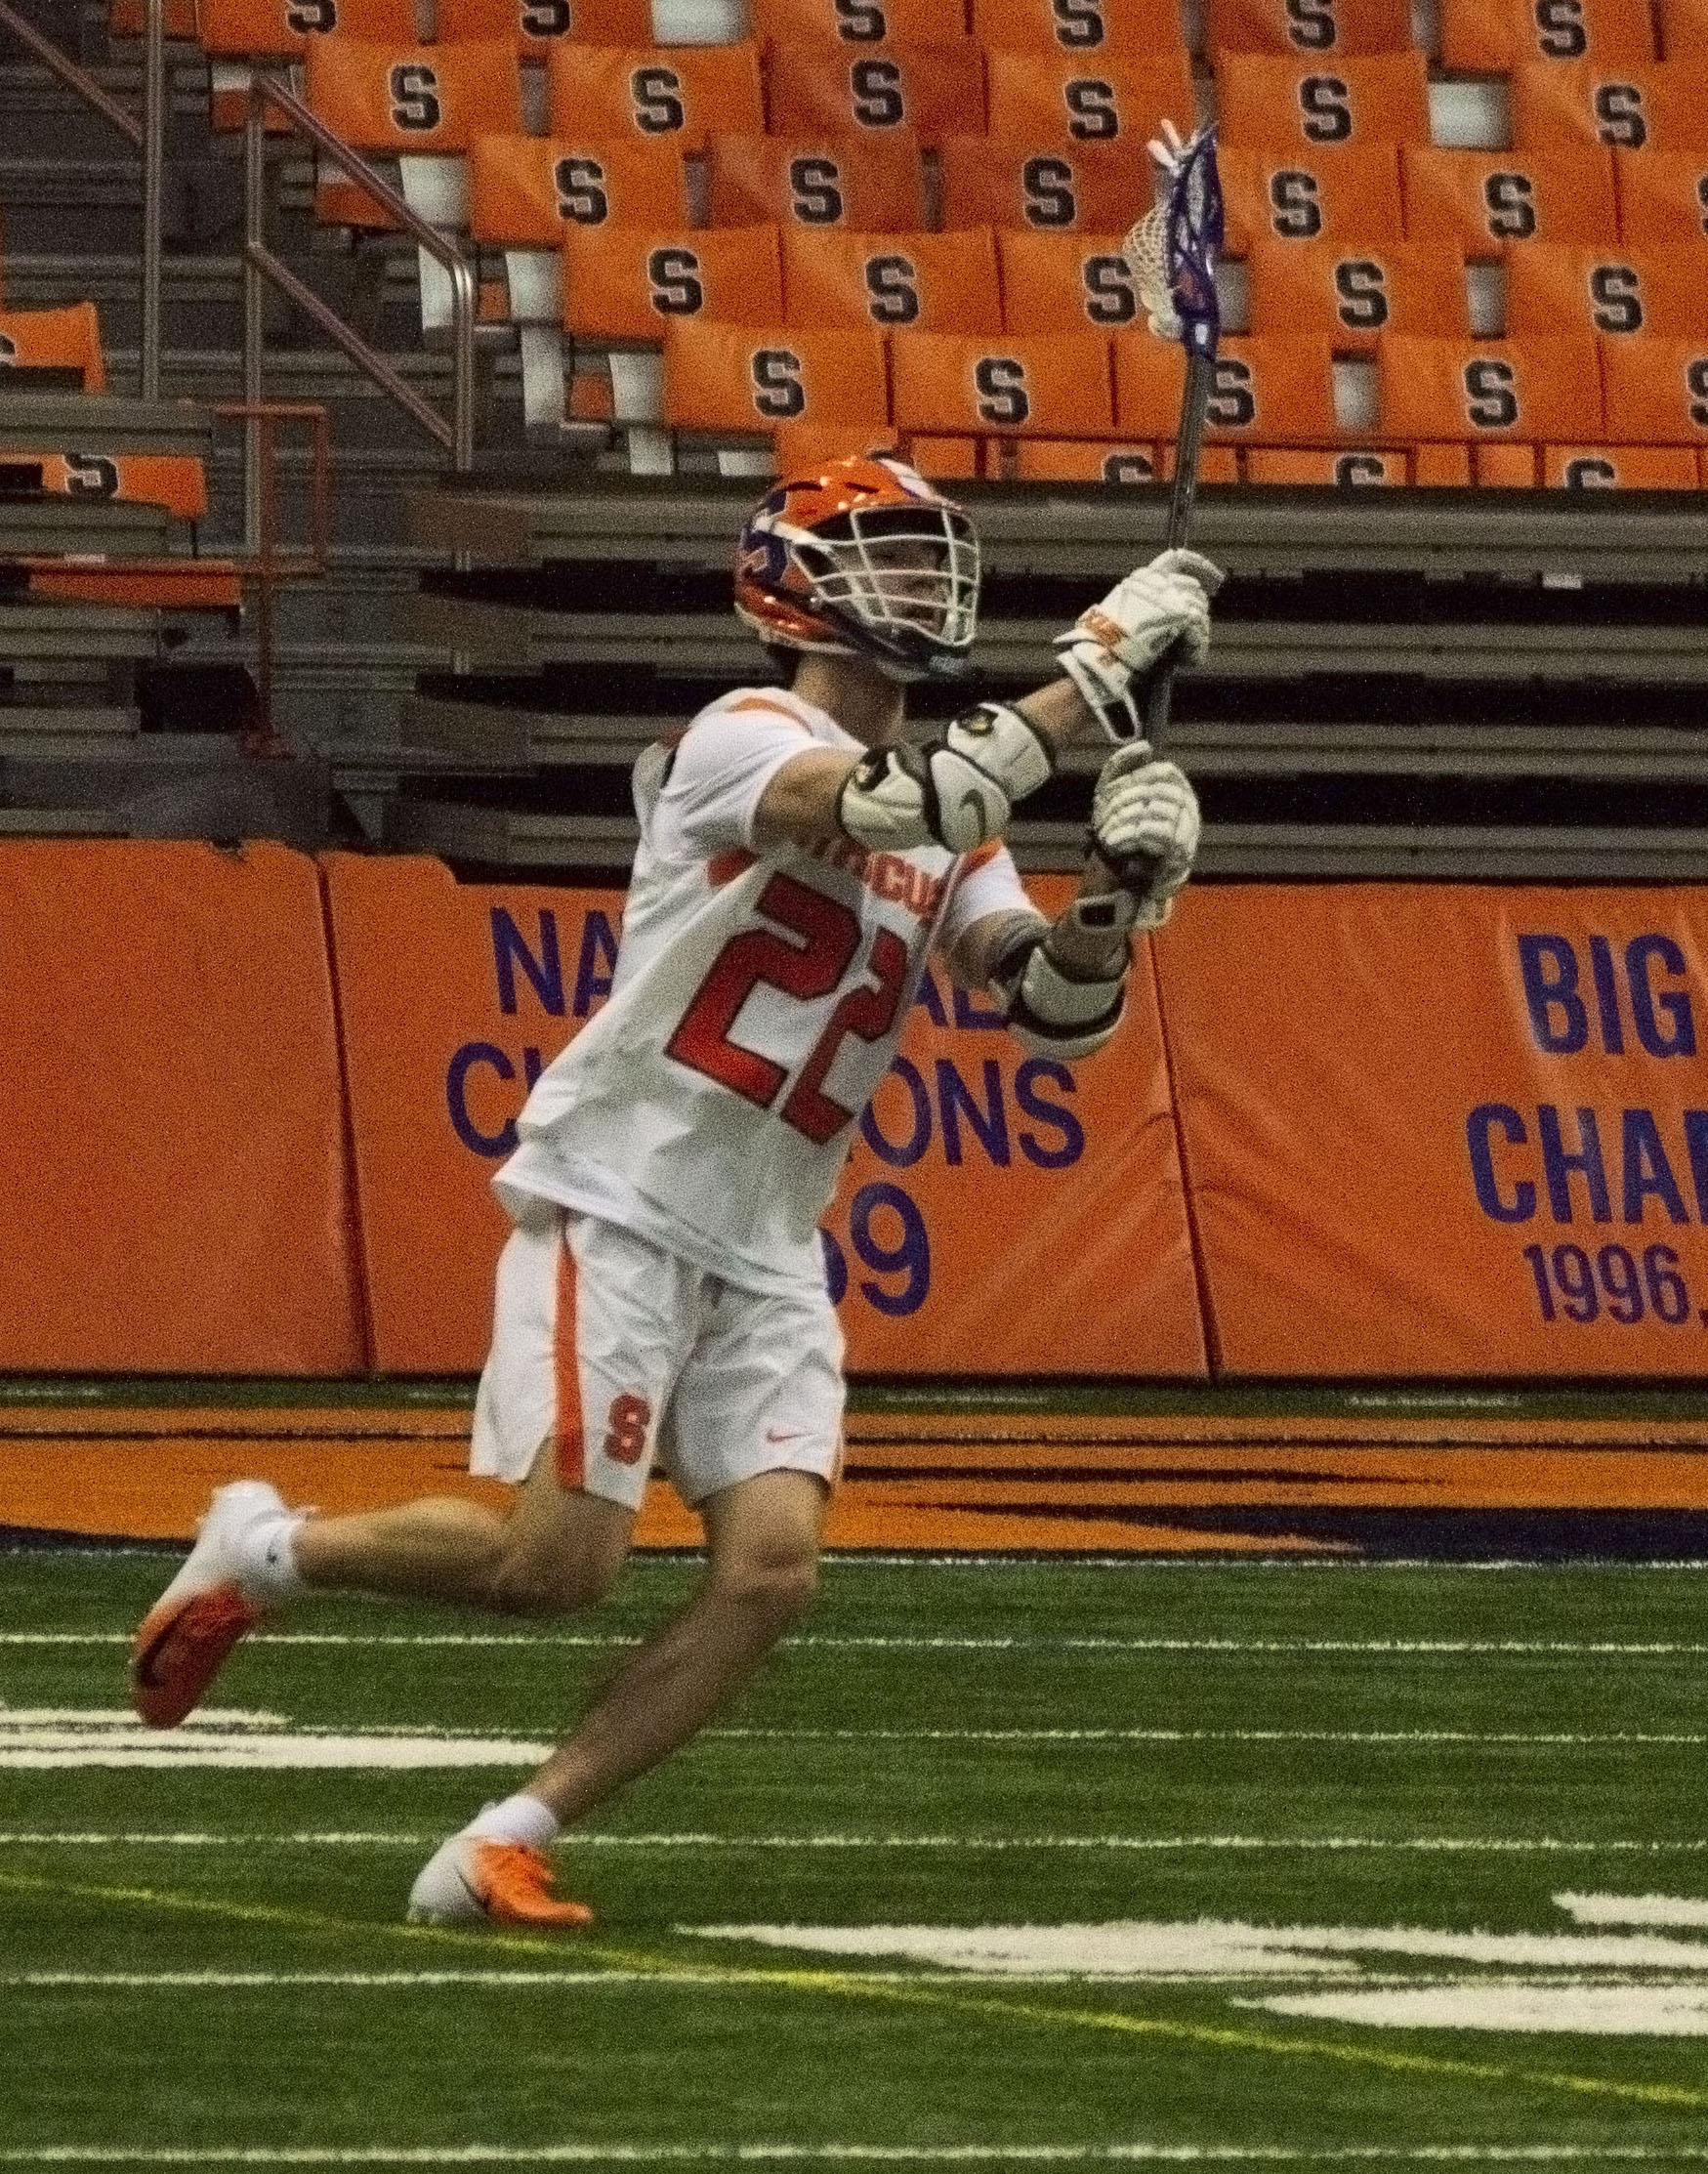 Chase Scanlan was the SU men's lacrosse's leading scorer with 7 goals vs. Colgate.